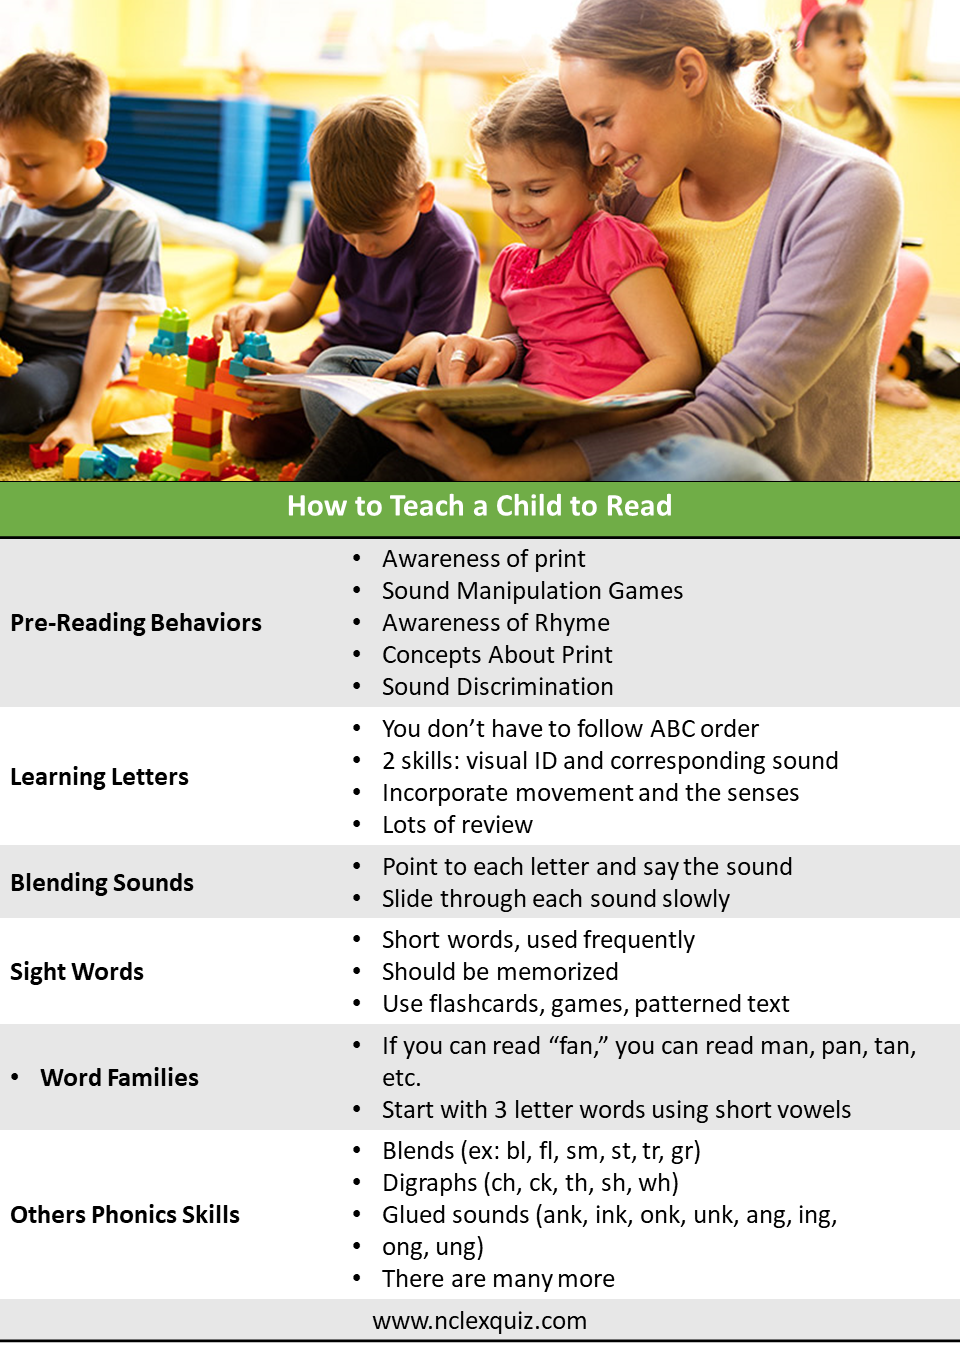 How to Teach a Child to Read in Two Weeks